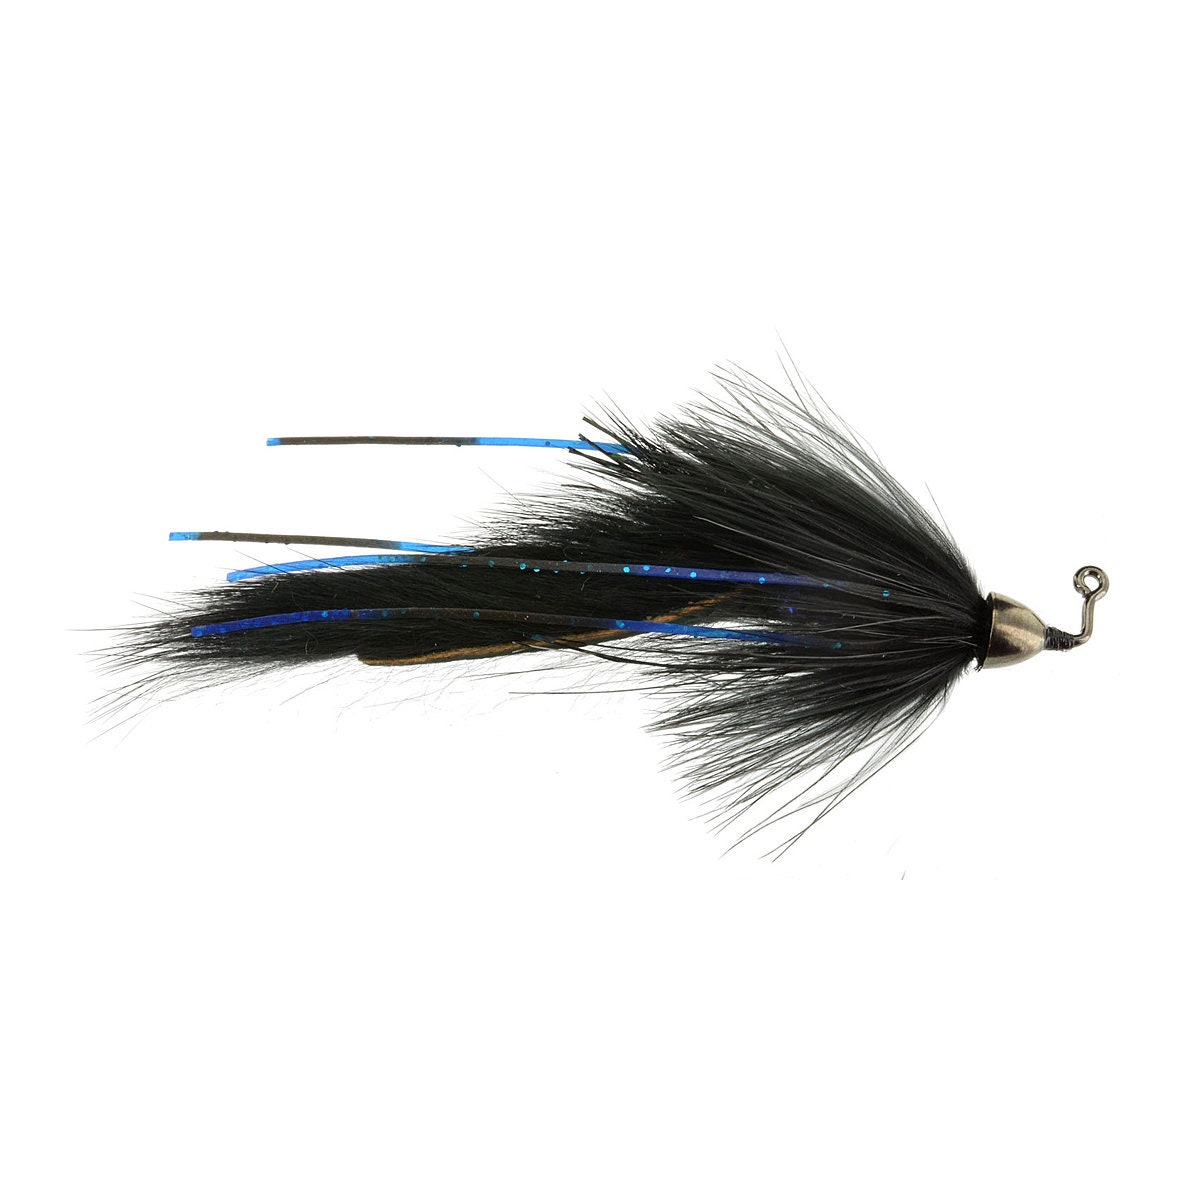 Bunblic Fly Fishing Flies Barbless Fly Hooks 6pcs Include Flies Nymphs Streamers For Trout Salmon Steelhead Fishing - 14 Other